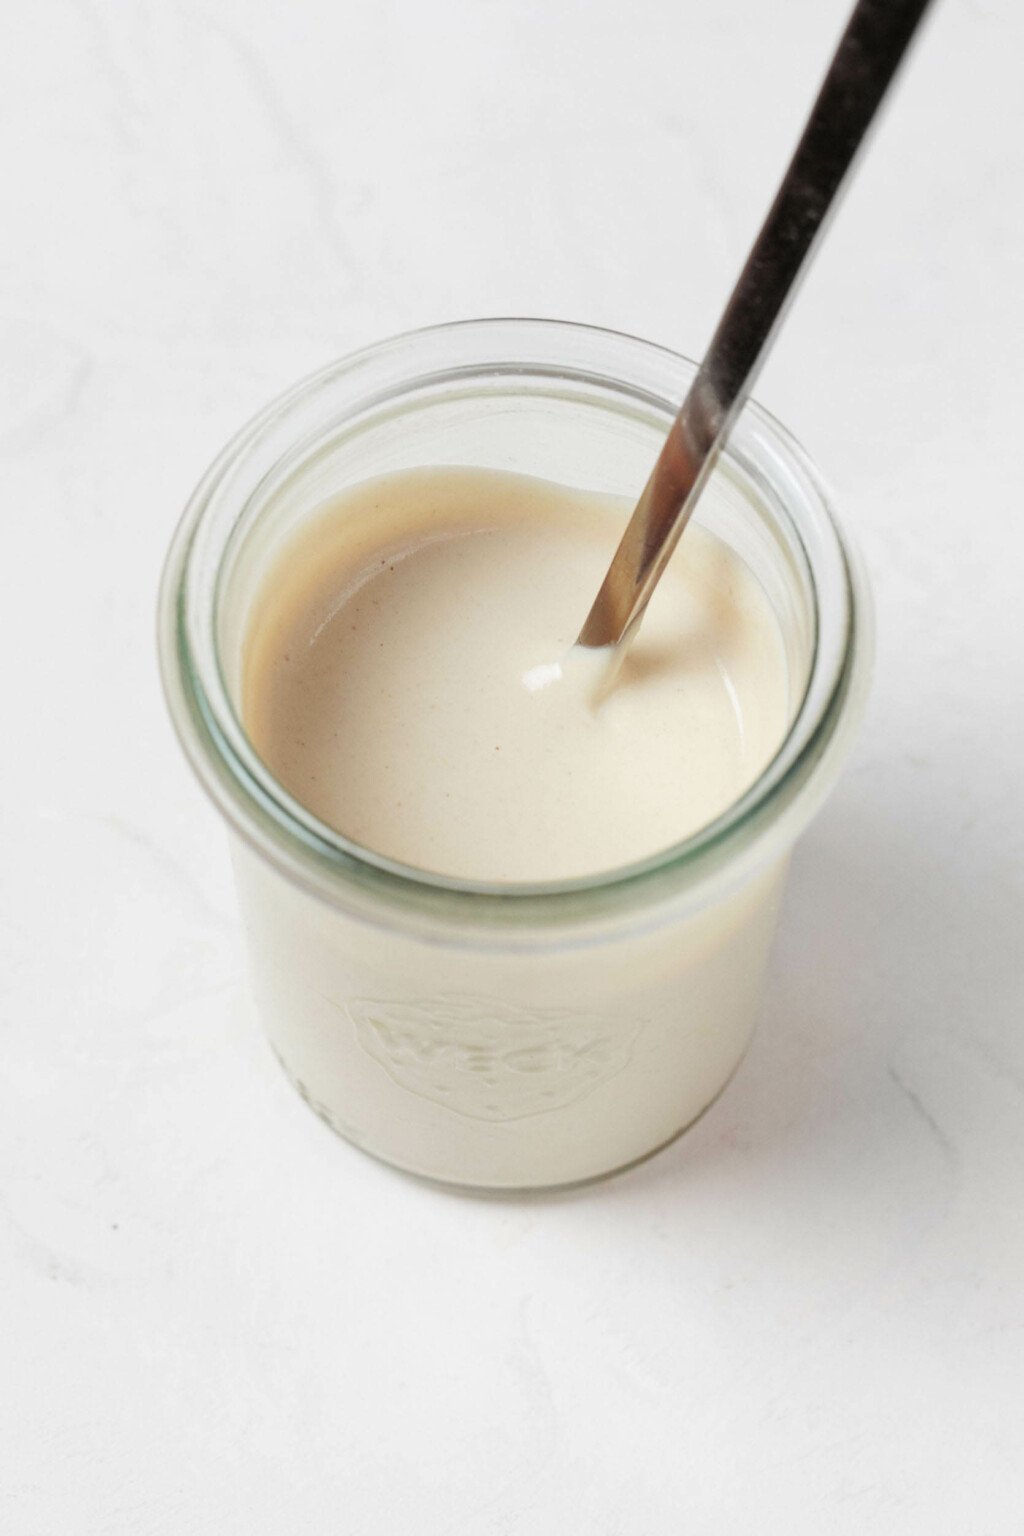 A Weck mason jar, resting on a white surface, holds a cream-colored tahini dressing.